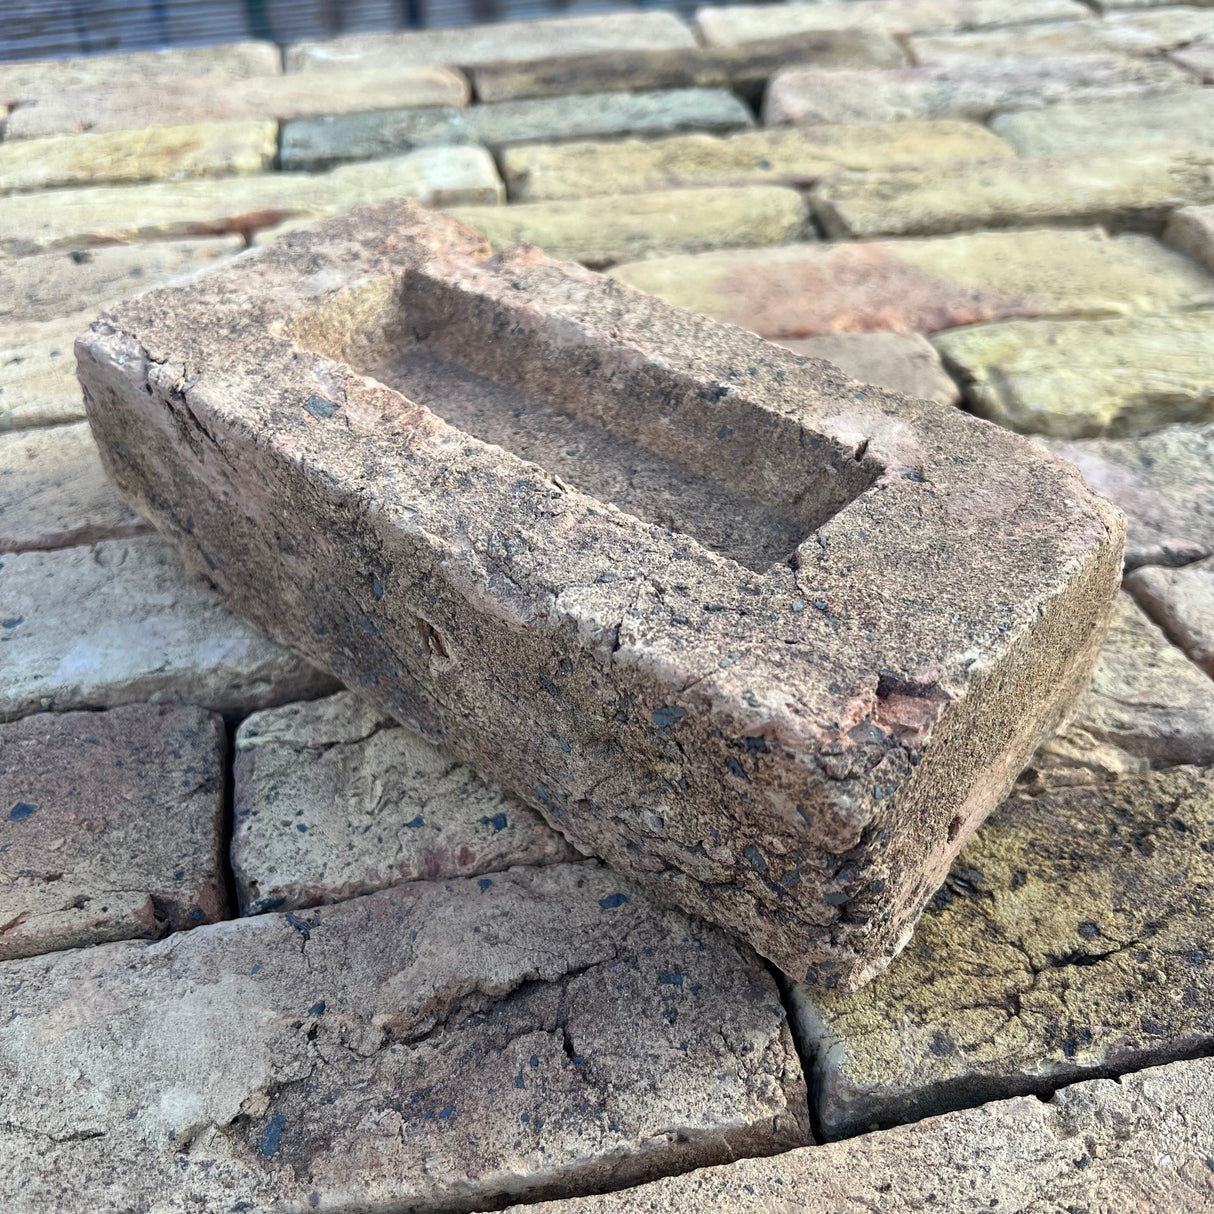 Reclamation Chiswick Yellow Stock Imperial Bricks | Pack of 512 Bricks | Free Delivery - Reclaimed Brick Company